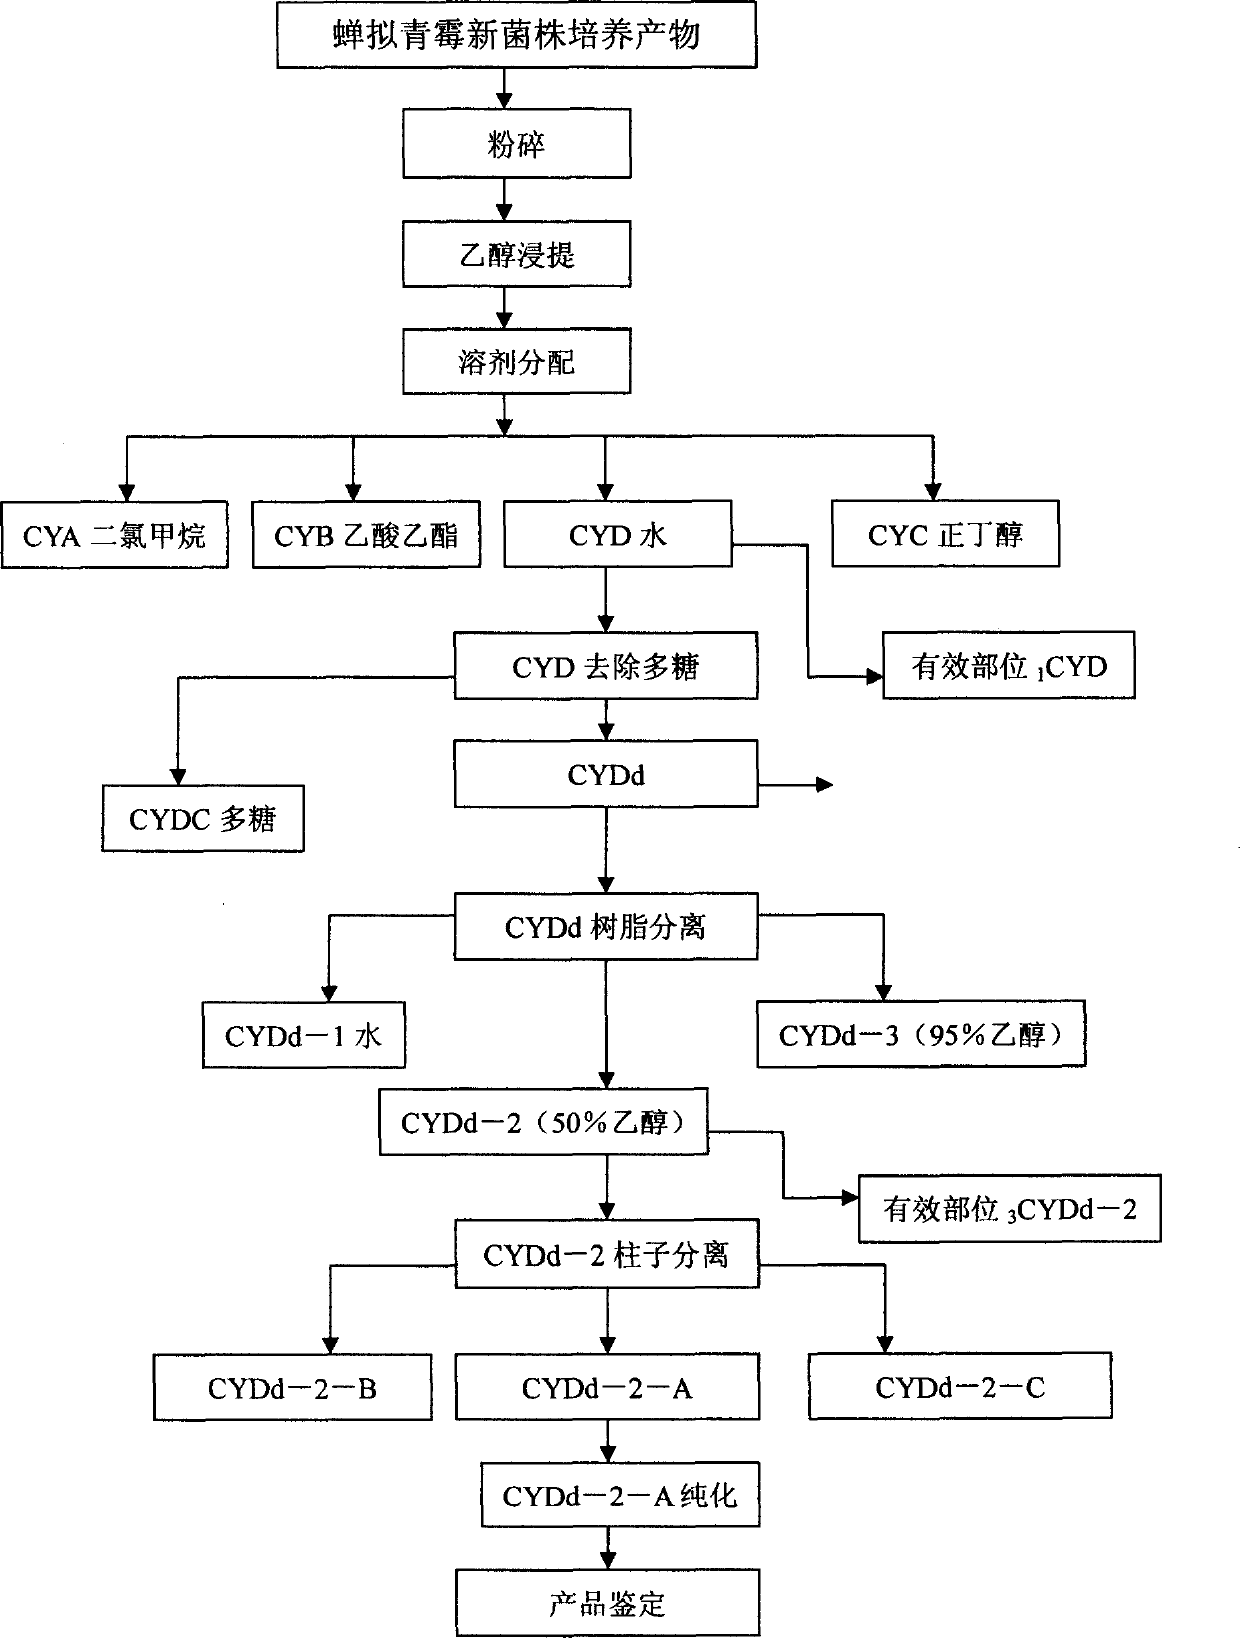 Culture of Chansi mould strains and extraction and use of anagentic compound therefrom